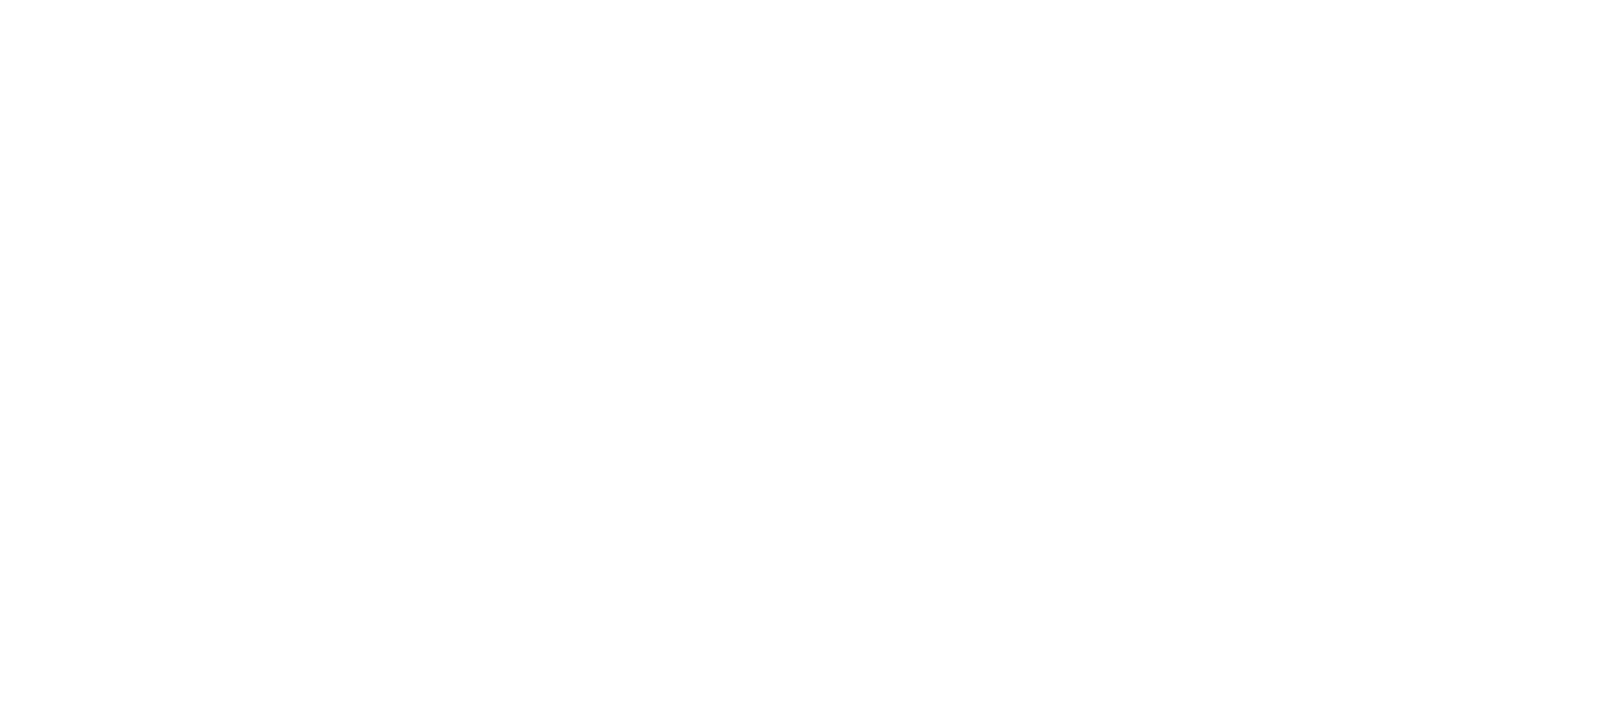 XLETIX Challenge presented by MaxiNutrition